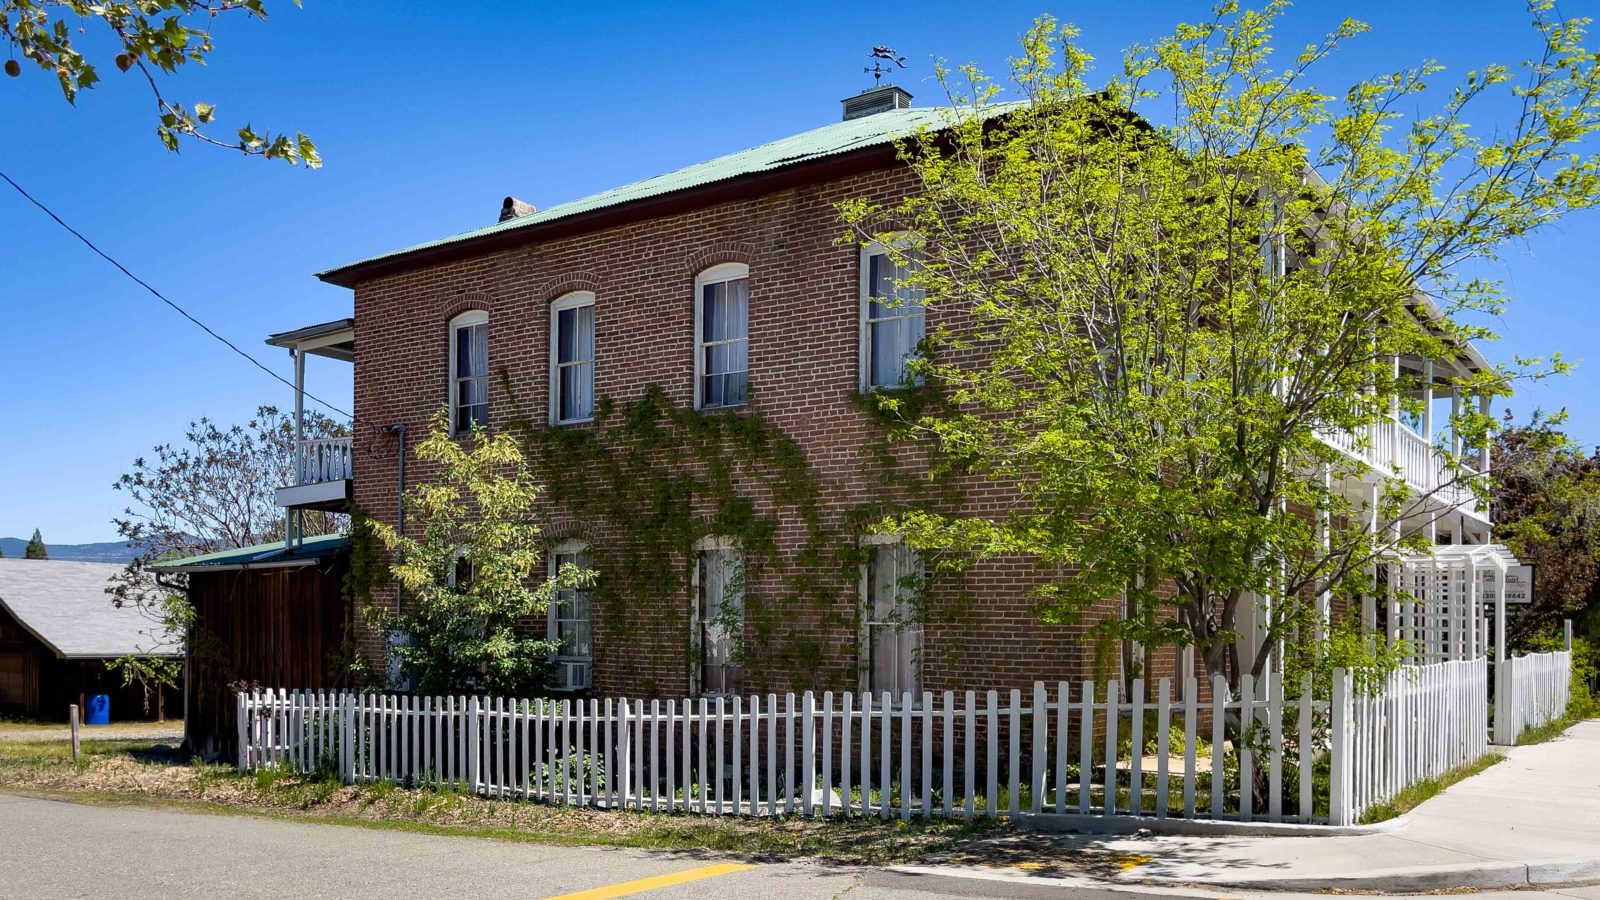 Historic Collier Hotel is a former rooming house in Etna, California